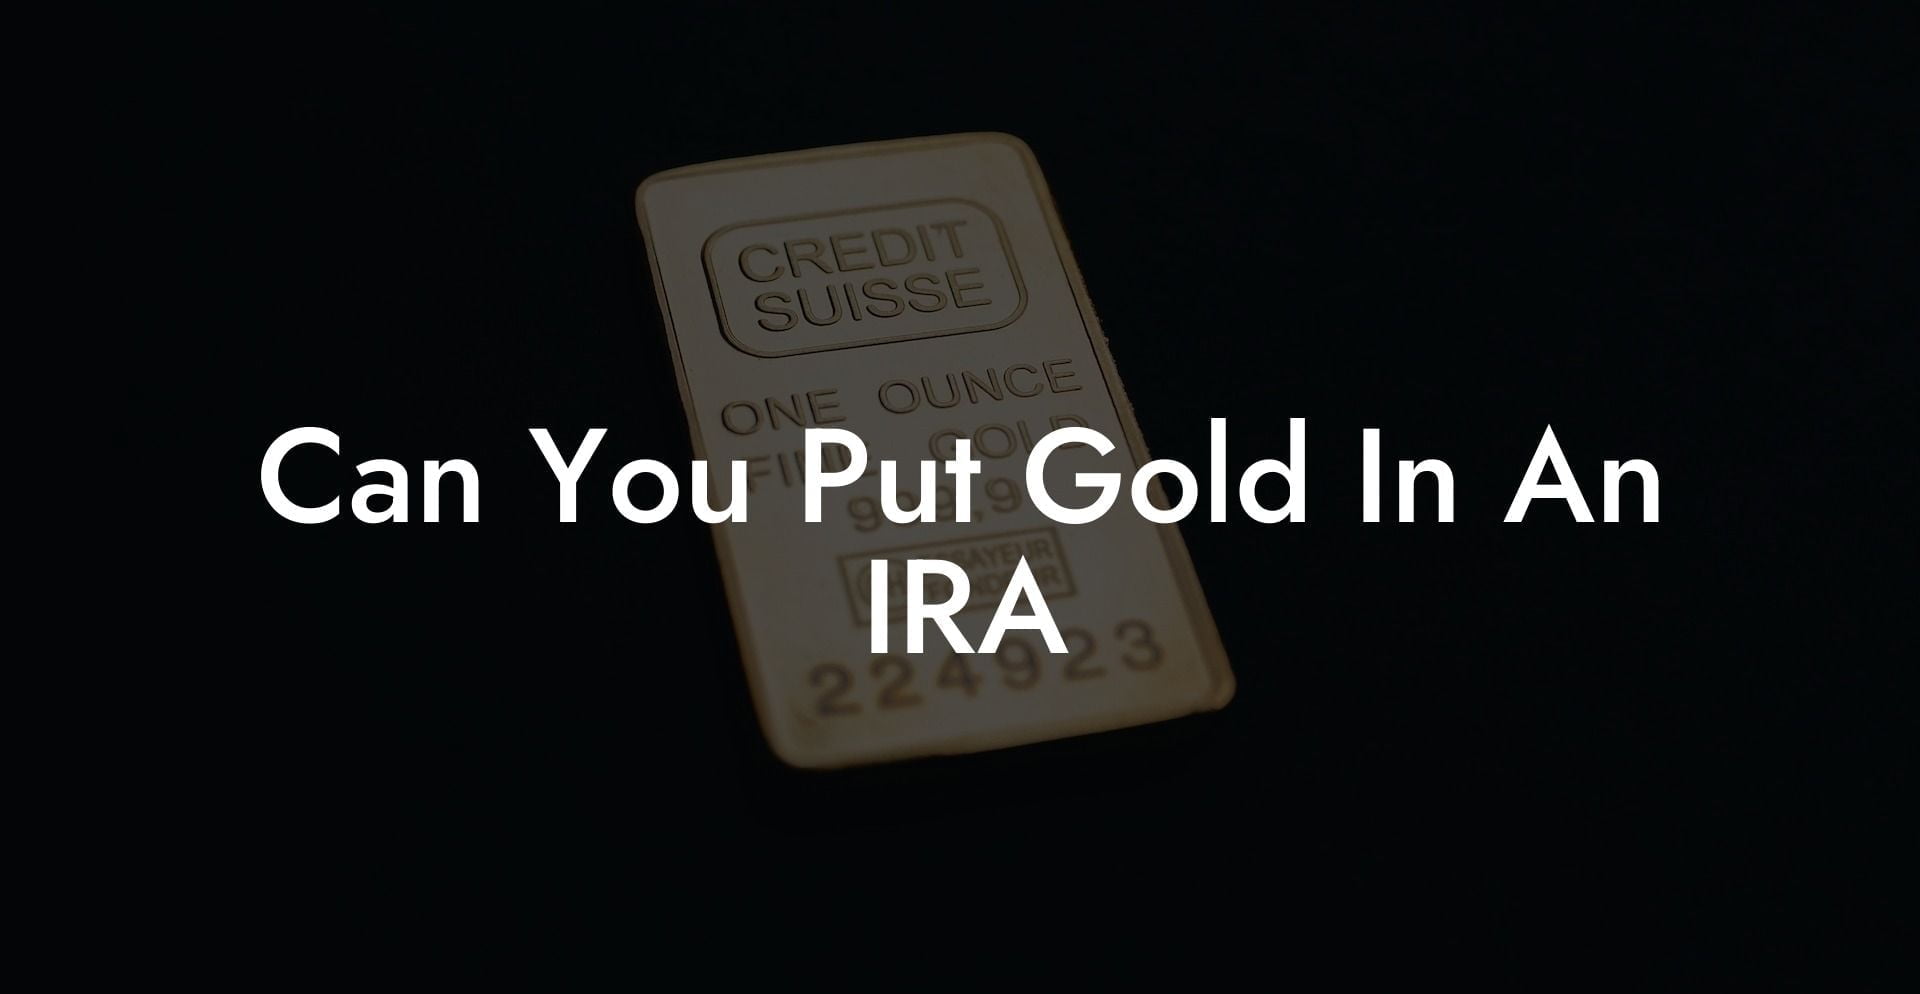 Can You Put Gold In An IRA